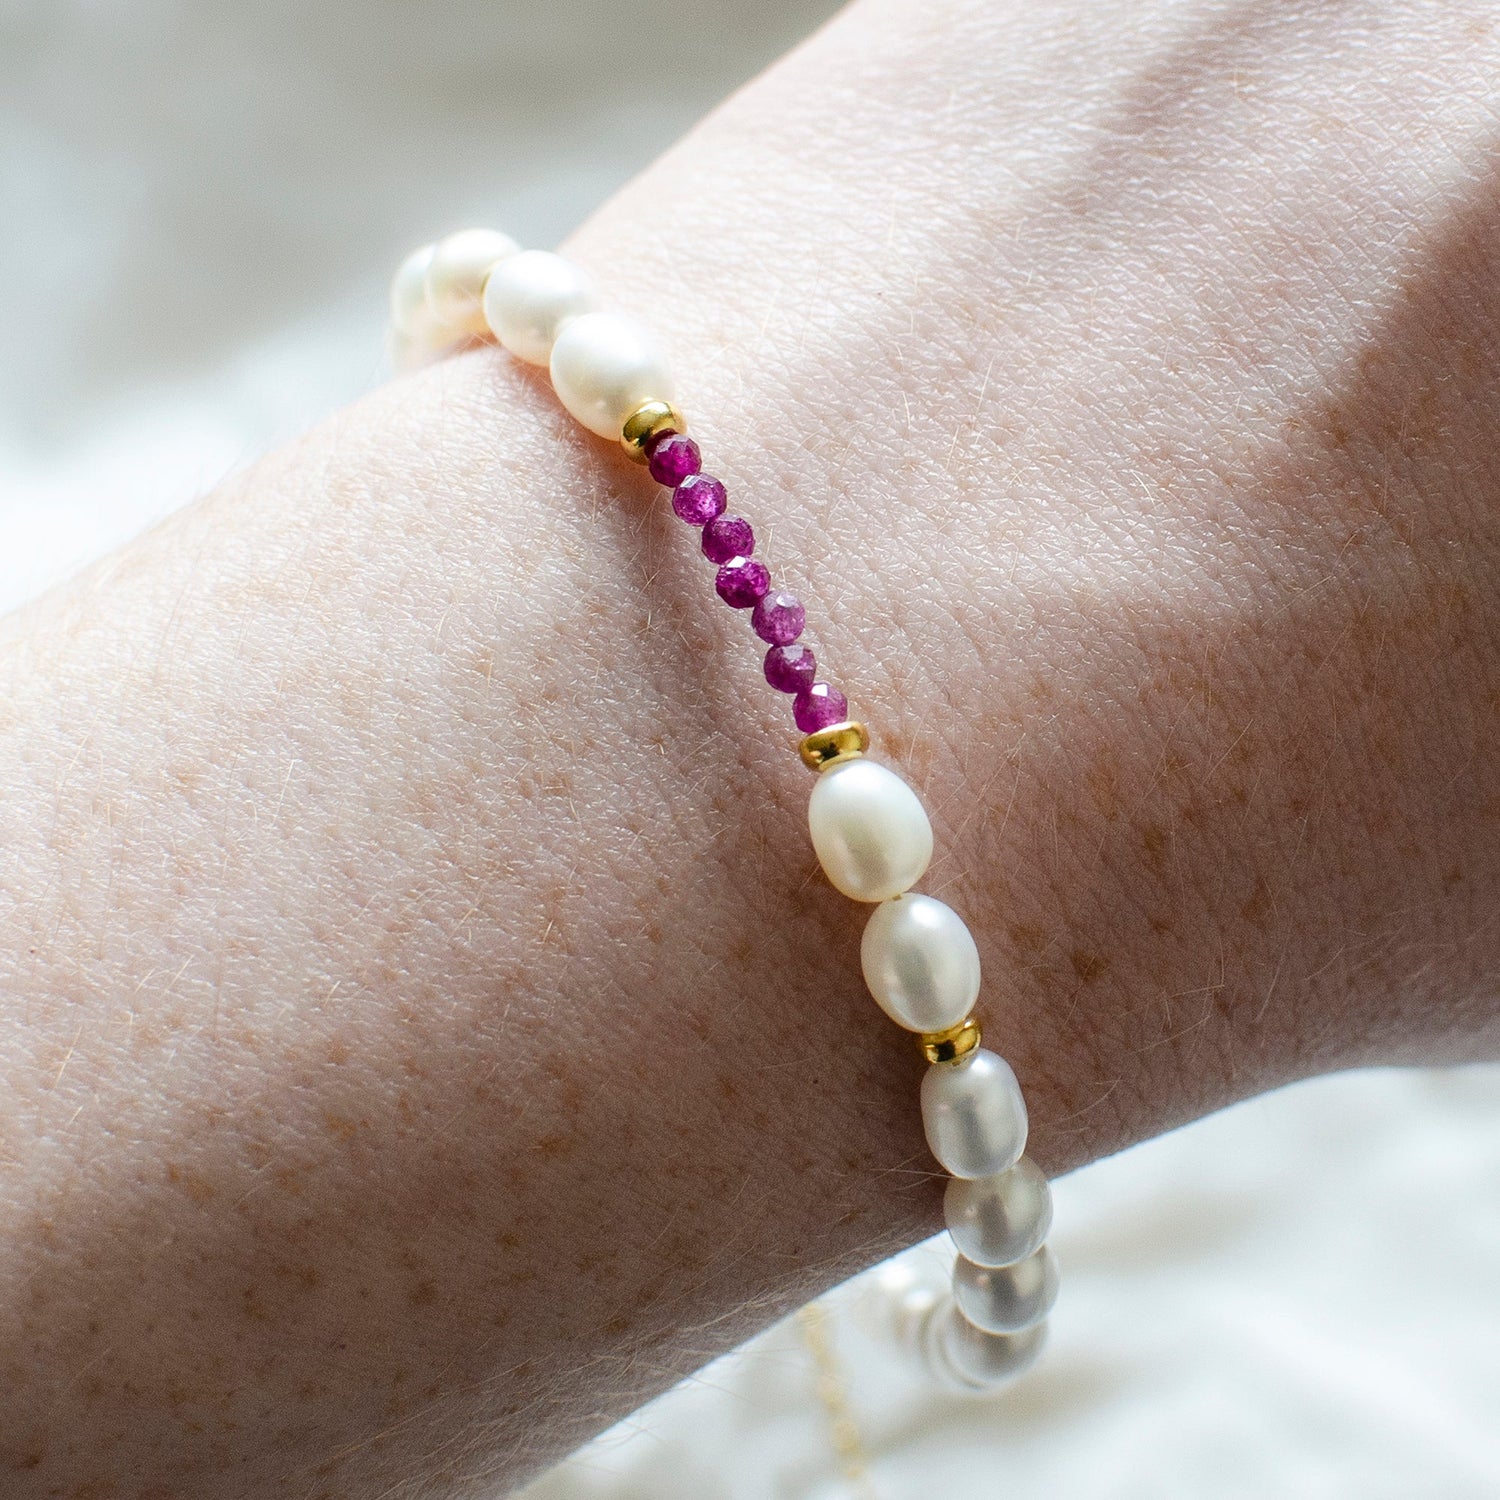 Marie Nicole Bijoux | ruby and pearl bracelet with gold vermeil silver accents